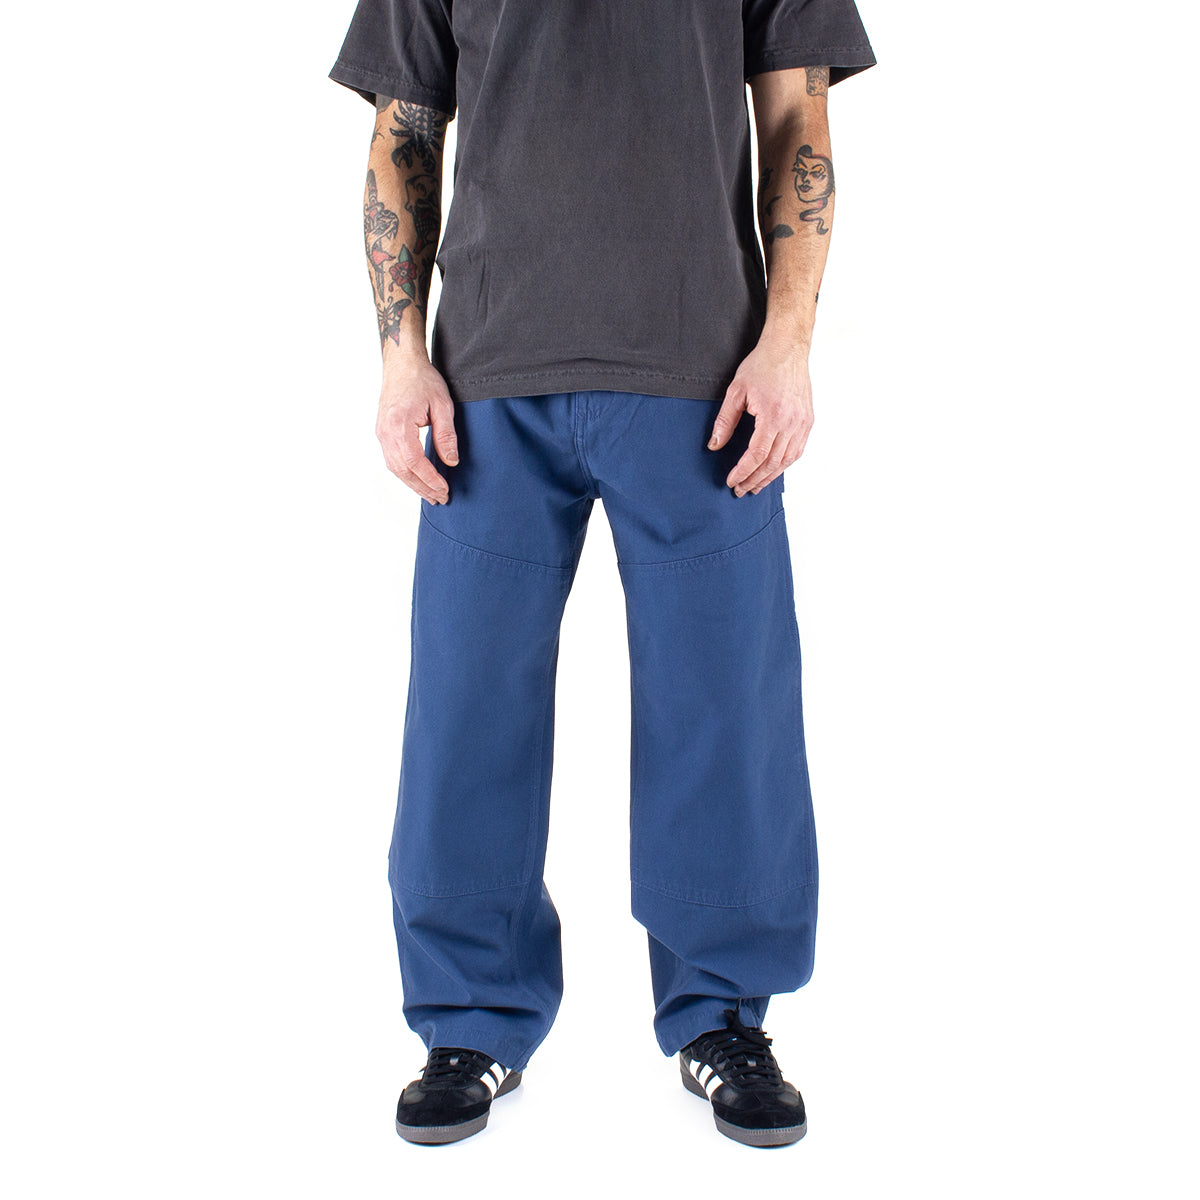 Carhartt WIP | Wide Panel Pant Style # I031393 -E9 Color : Naval